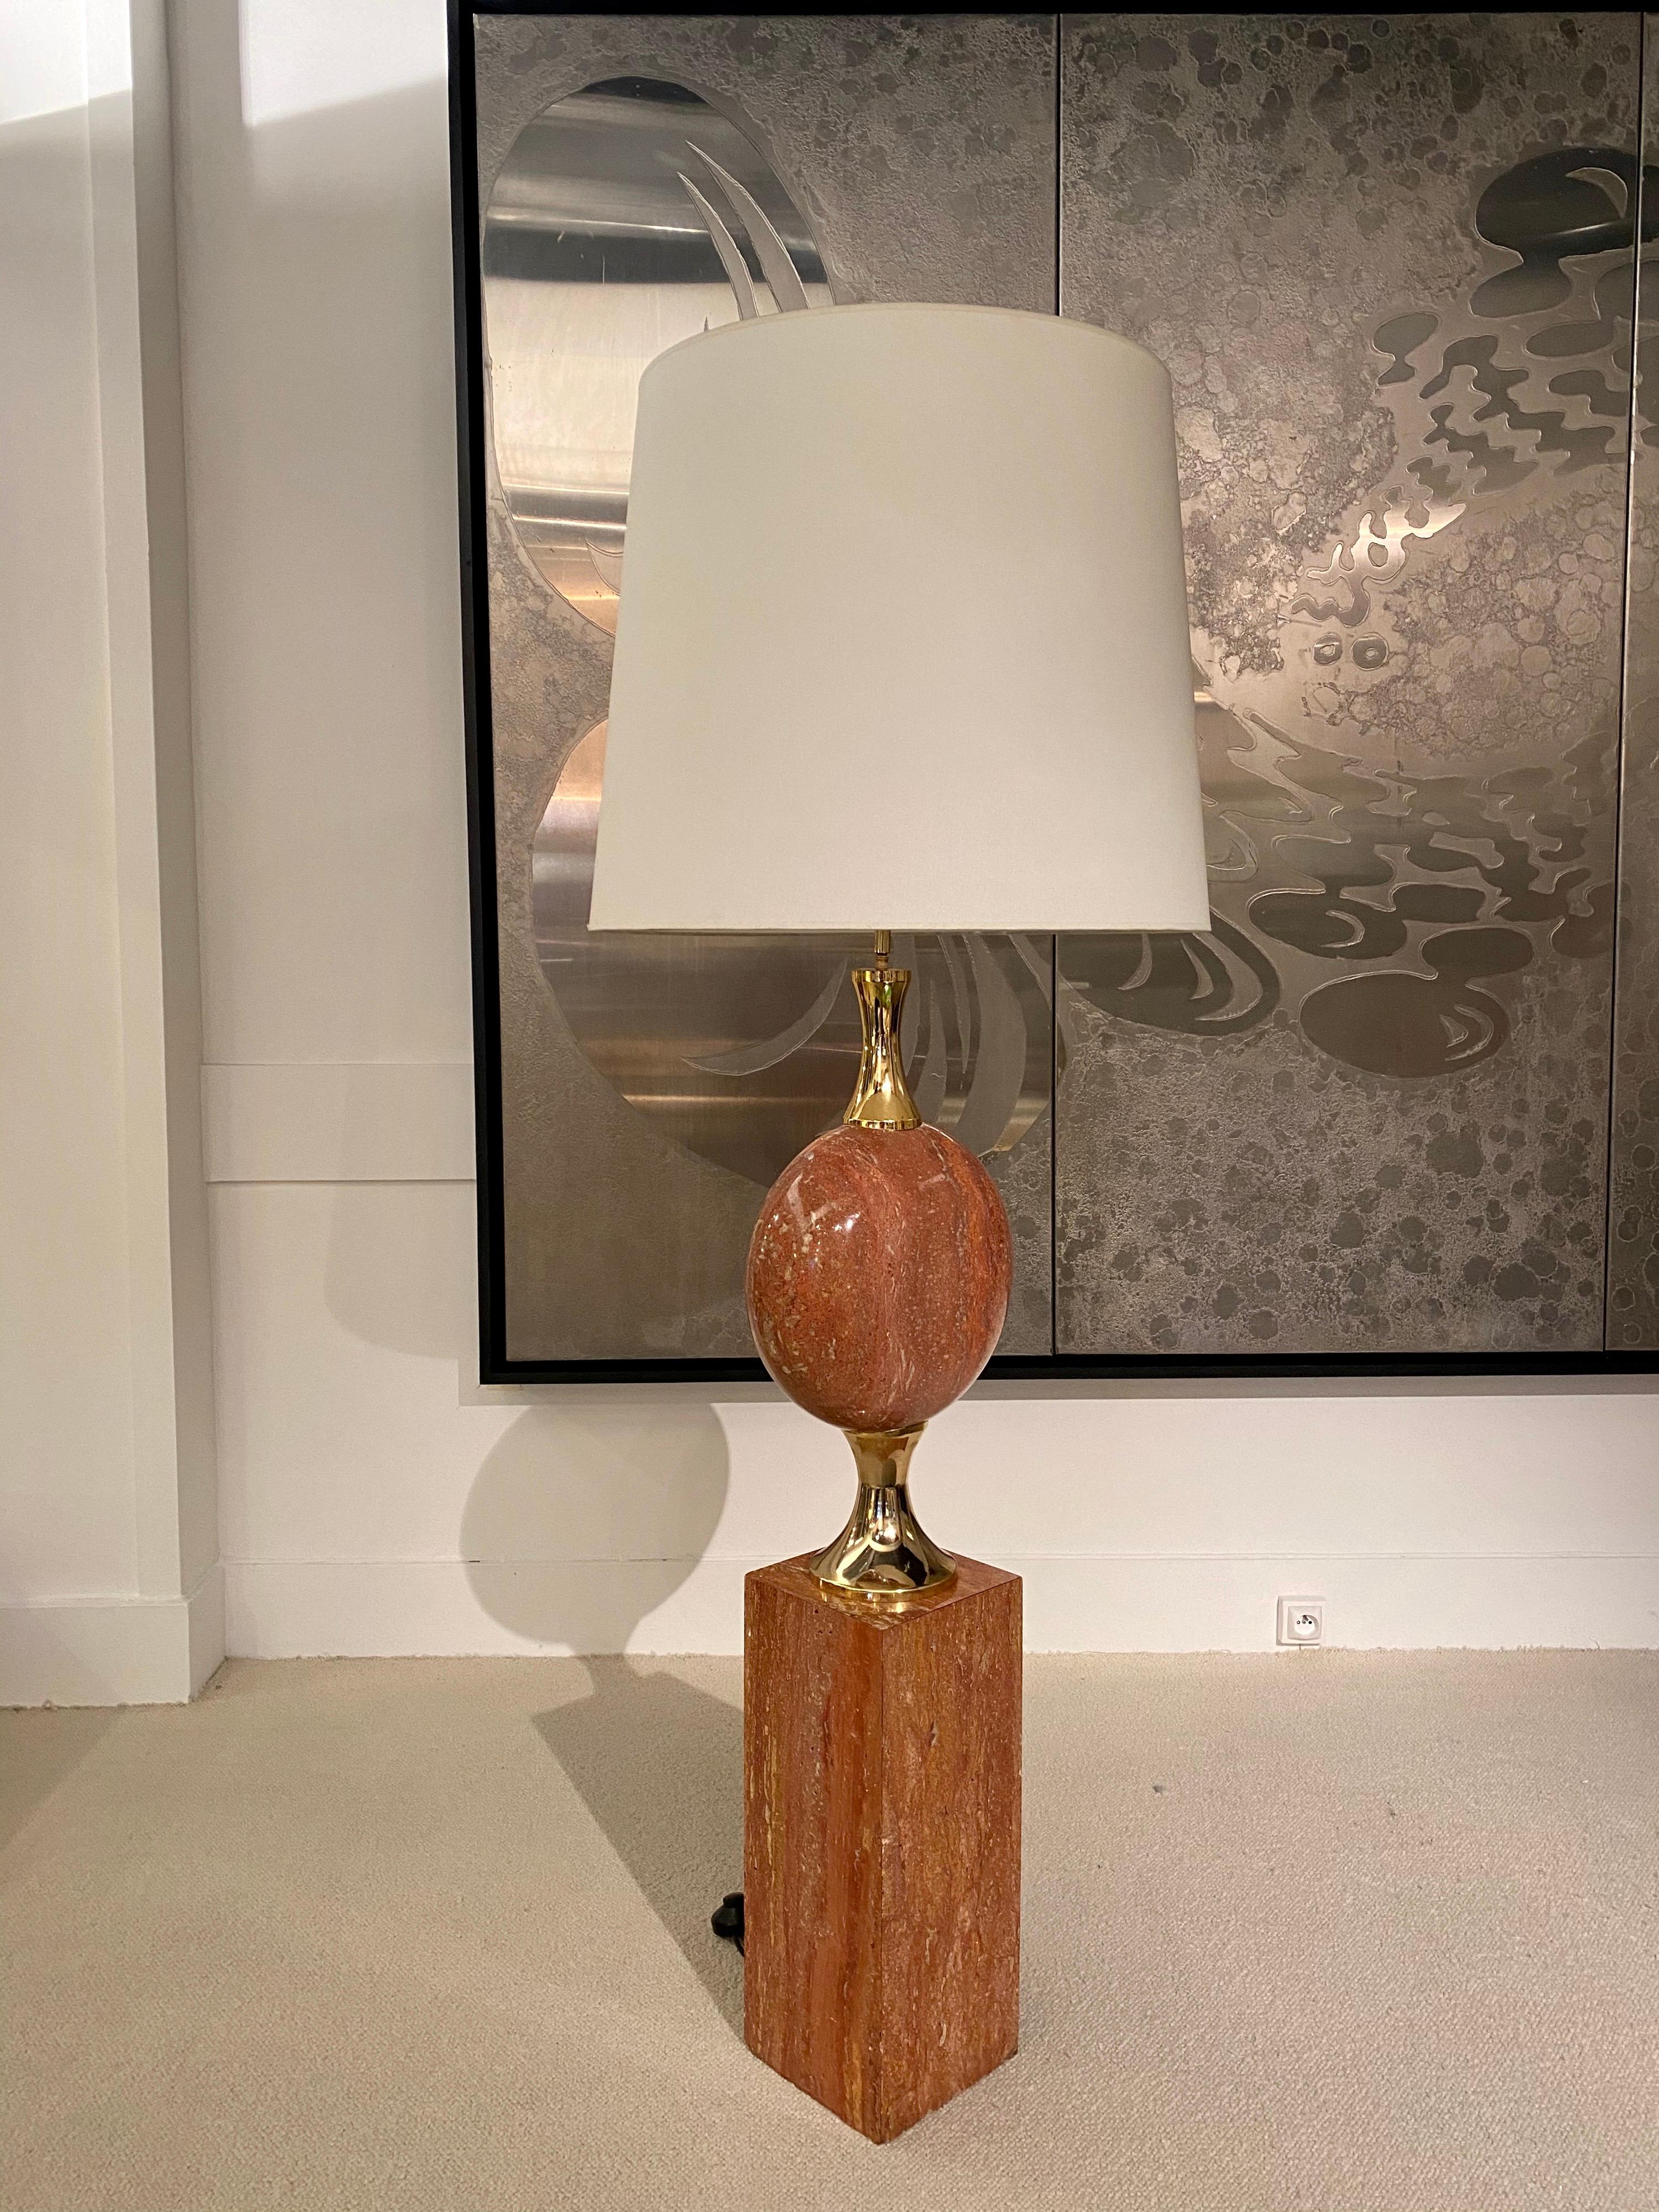 Floor lamp in red travertine and brass details by Philippe Barbier, France, circa 1970
3-light bulbs
Bran new shade.